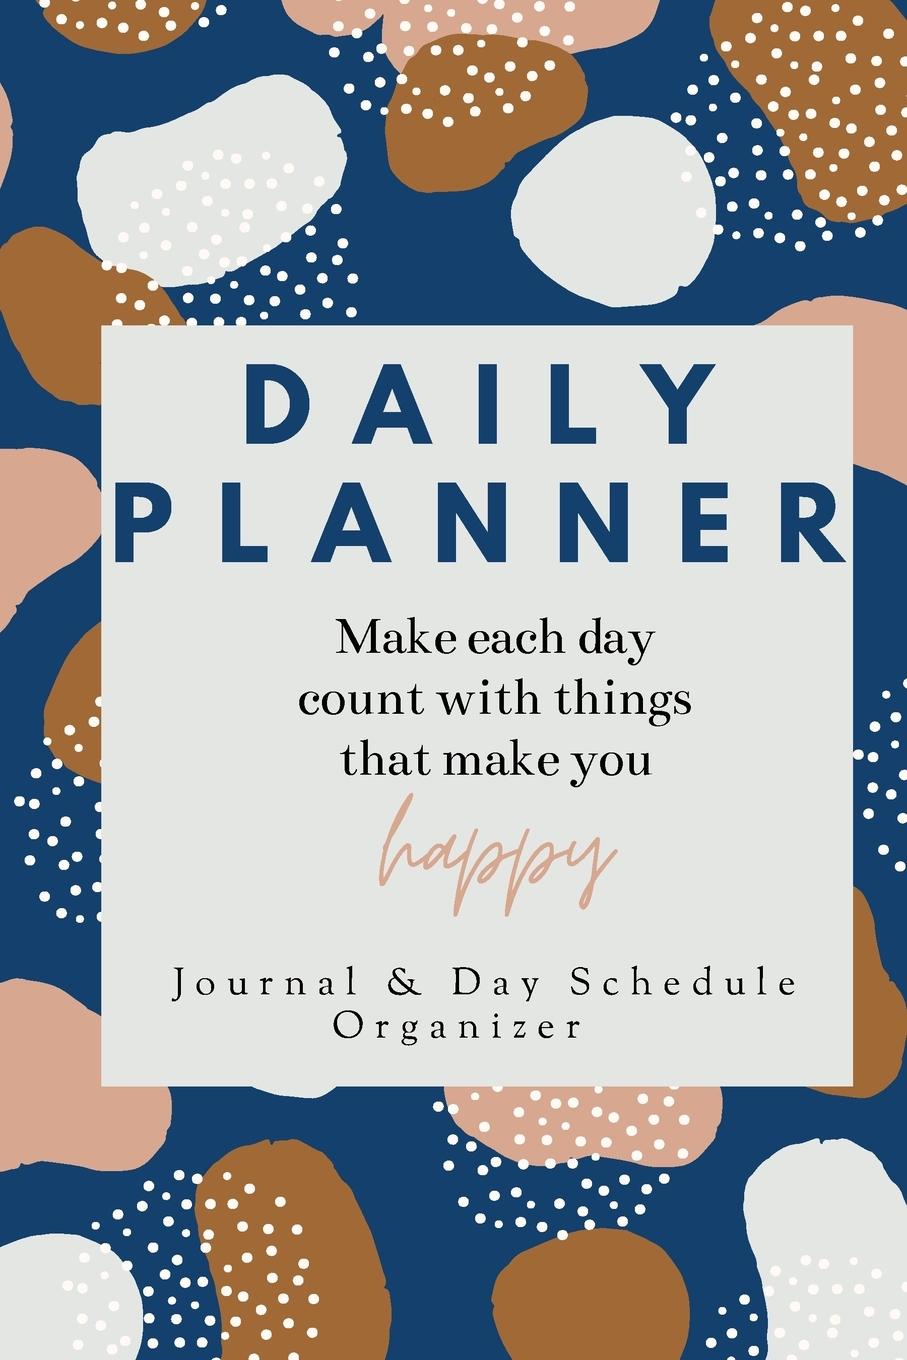 Book Daily Planner Make each day count with things that make you Happy Journal & Day Schedule Organizer 